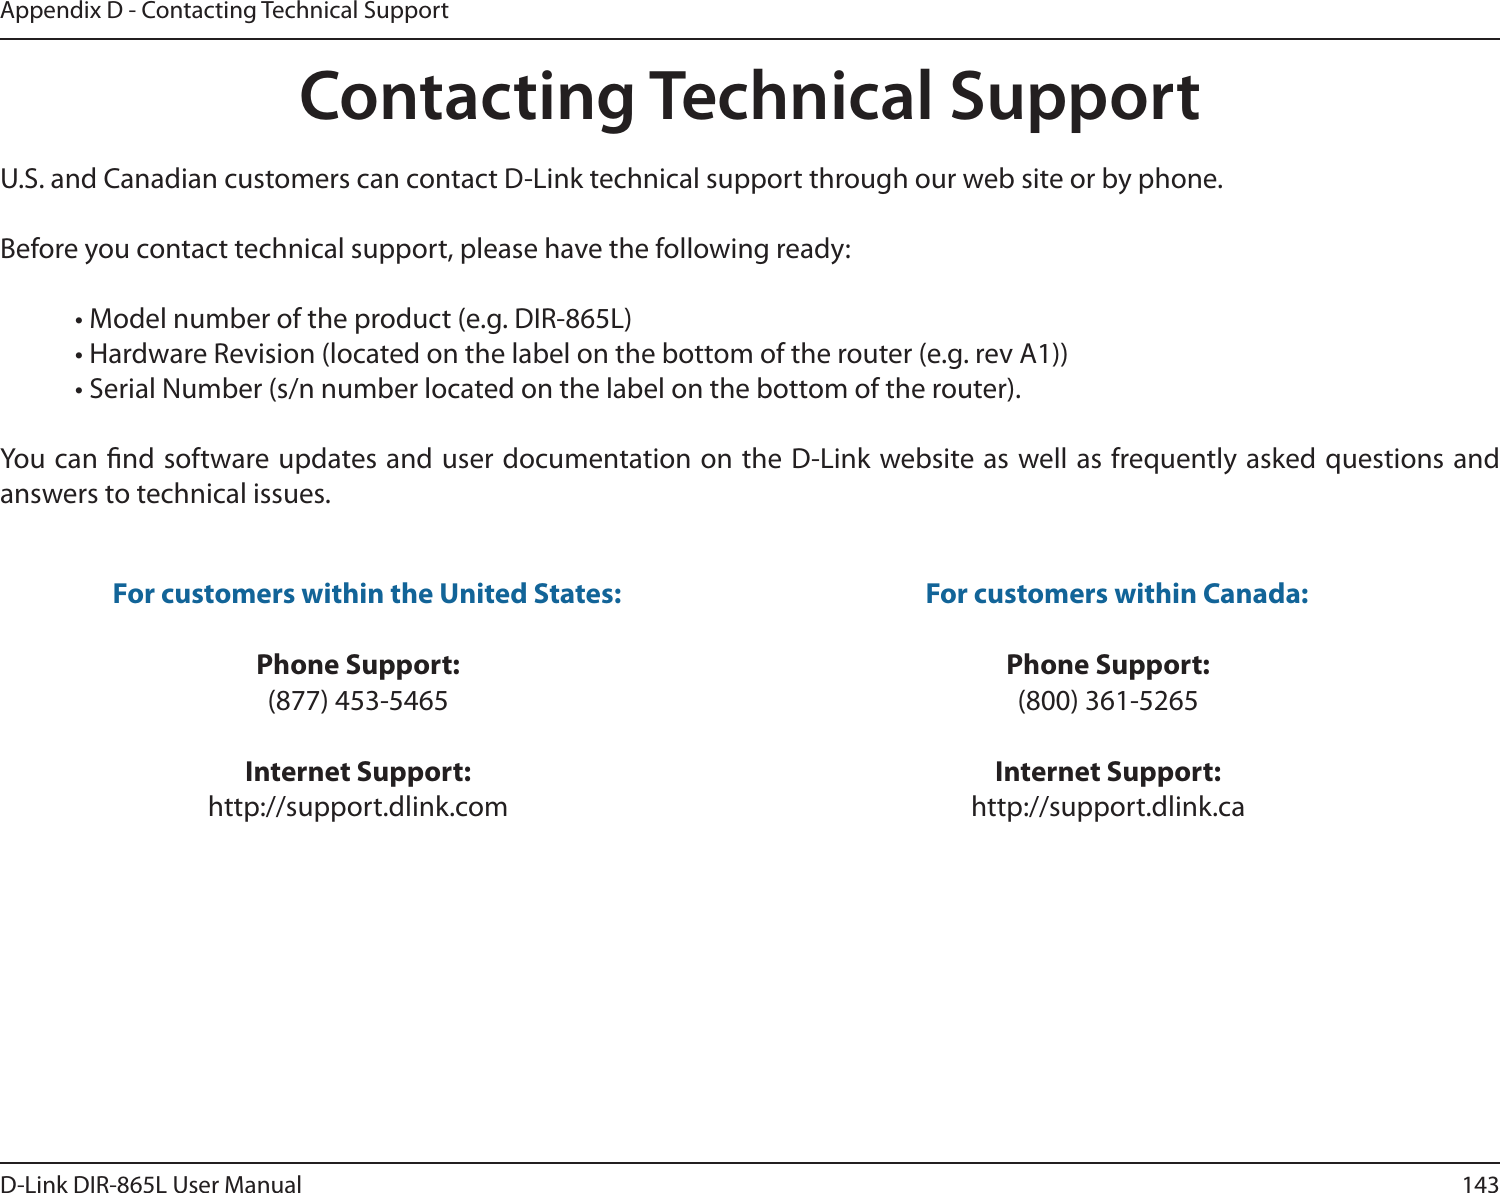 143D-Link DIR-865L User ManualAppendix D - Contacting Technical SupportContacting Technical SupportU.S. and Canadian customers can contact D-Link technical support through our web site or by phone.Before you contact technical support, please have the following ready:  • Model number of the product (e.g. DIR-865L)  • Hardware Revision (located on the label on the bottom of the router (e.g. rev A1))  • Serial Number (s/n number located on the label on the bottom of the router). You can nd software updates and user documentation on the D-Link website as well as frequently asked questions and answers to technical issues.For customers within the United States: Phone Support:(877) 453-5465Internet Support:http://support.dlink.com For customers within Canada: Phone Support:(800) 361-5265Internet Support:http://support.dlink.ca 